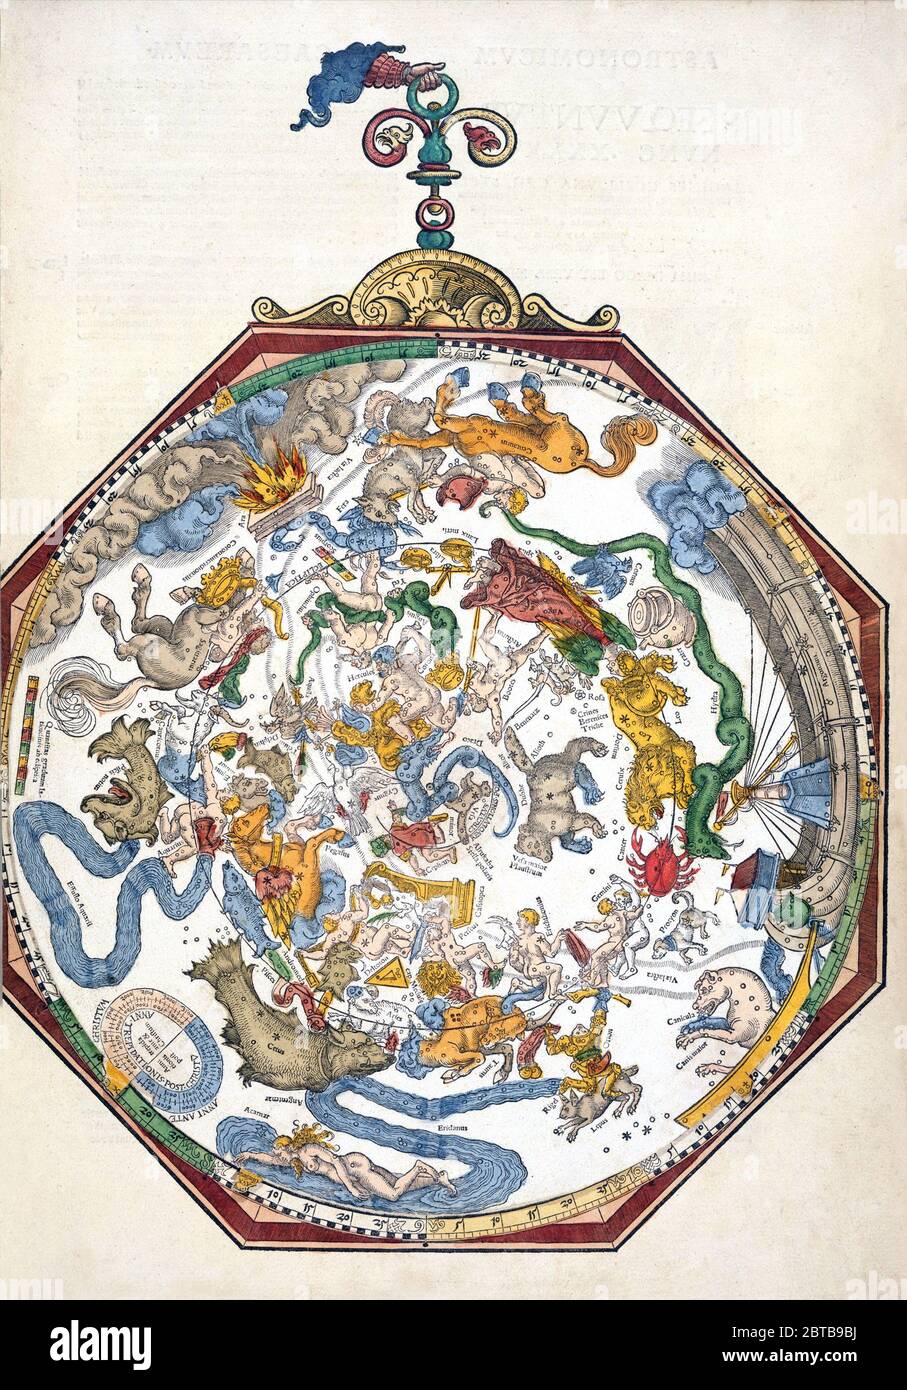 1540, GERMANY : The german cartographer , astronomer and mathematician  PETER APIAN aka PETRUS APIANUS aka PIETRO APIANO ( 1495 - 1552 ). Illustration from the book by Peter Apian ASTRONOMICUM CAESAREUM, printed in ( 1540 ), engraved by Michael Ostendorfer . - TOLOMEUS - TOLOMEO - AMERICO VESPUCCI - Amerigo - Peter Bennewitz or Peter Bienewitz - CARTOGRAFO - CARTOGRAFIA - CARTOGRAPHY - GEOGRAFIA - GEOGRAPHY - HISTORY - foto storiche  - COSMOGRAFIA - COSMOGONIA - ASTRONOMIA - ASTRONOMY - ASTRONOMER - ASTRONOMO -  illustrazione - illustration - engraving - incisione  - cartografo - cartografia - Stock Photo